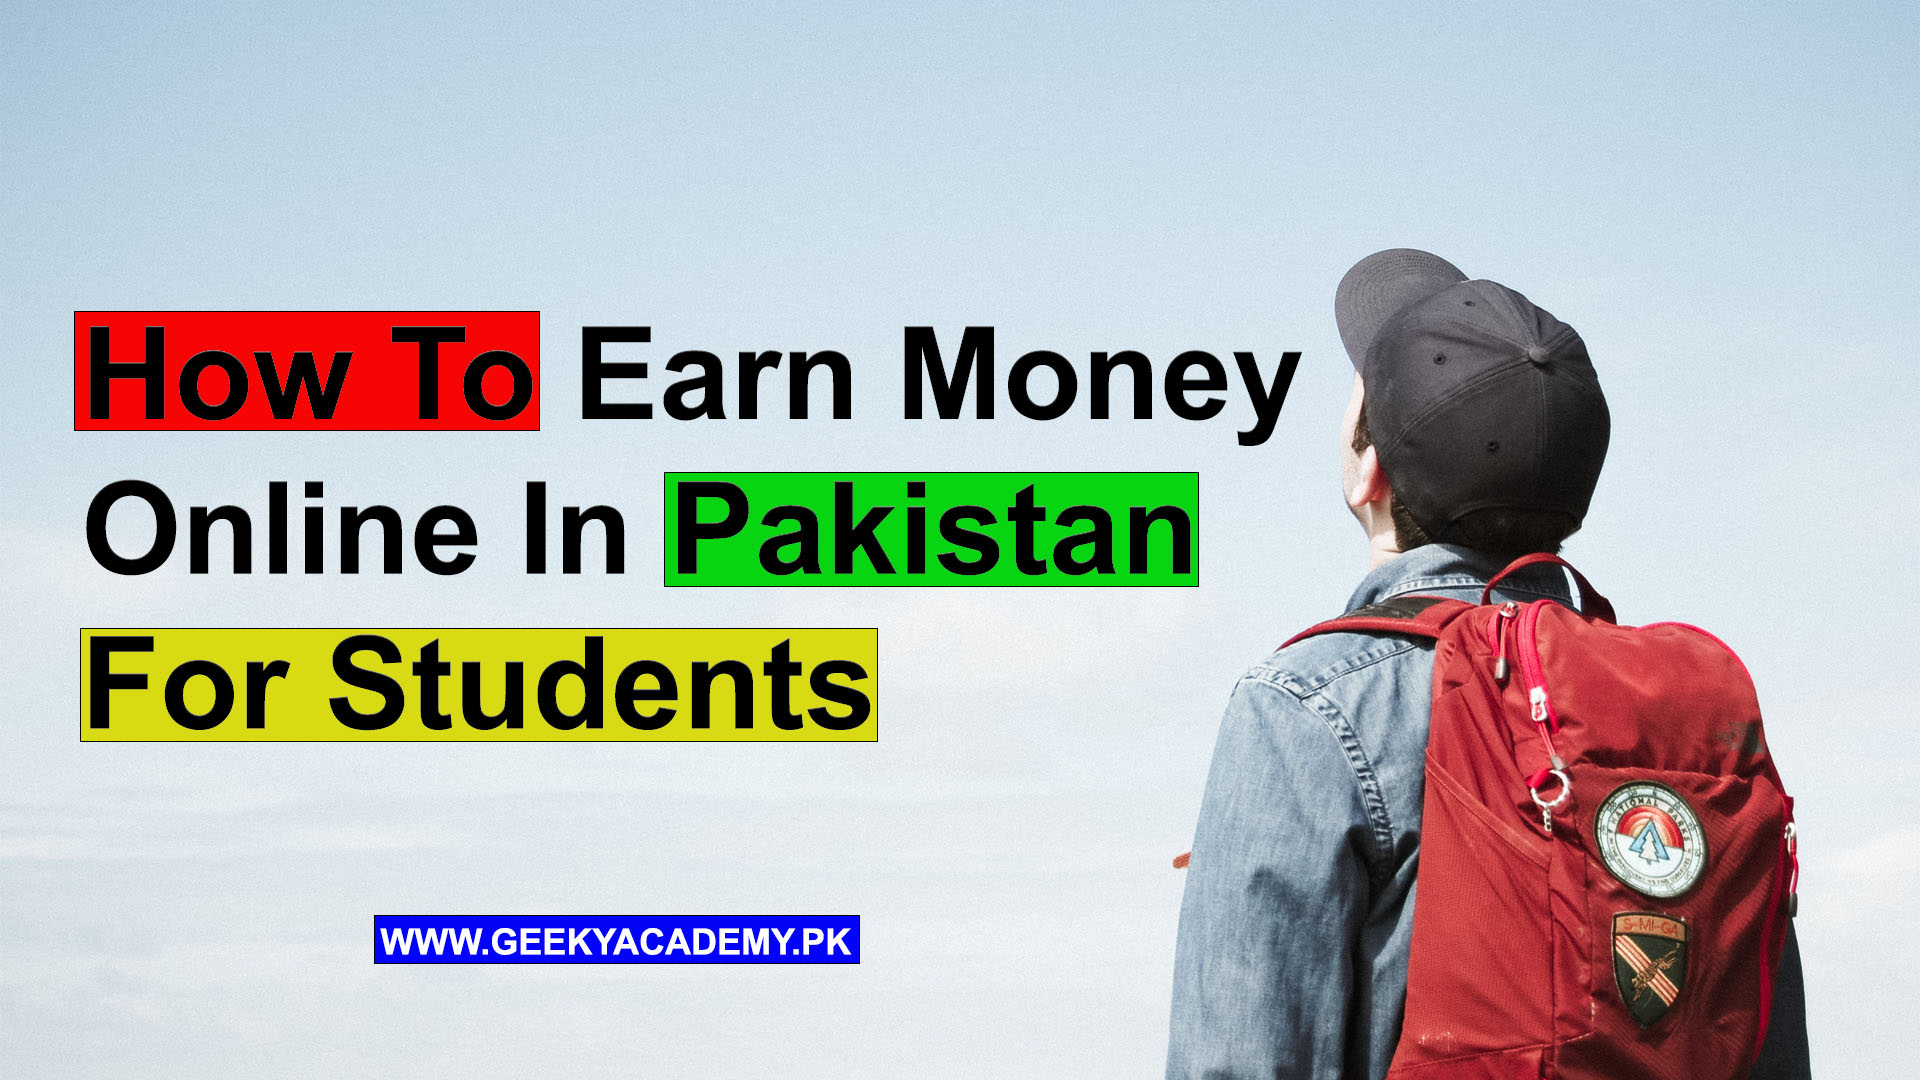 How To Earn Money Online In Pakistan For Students